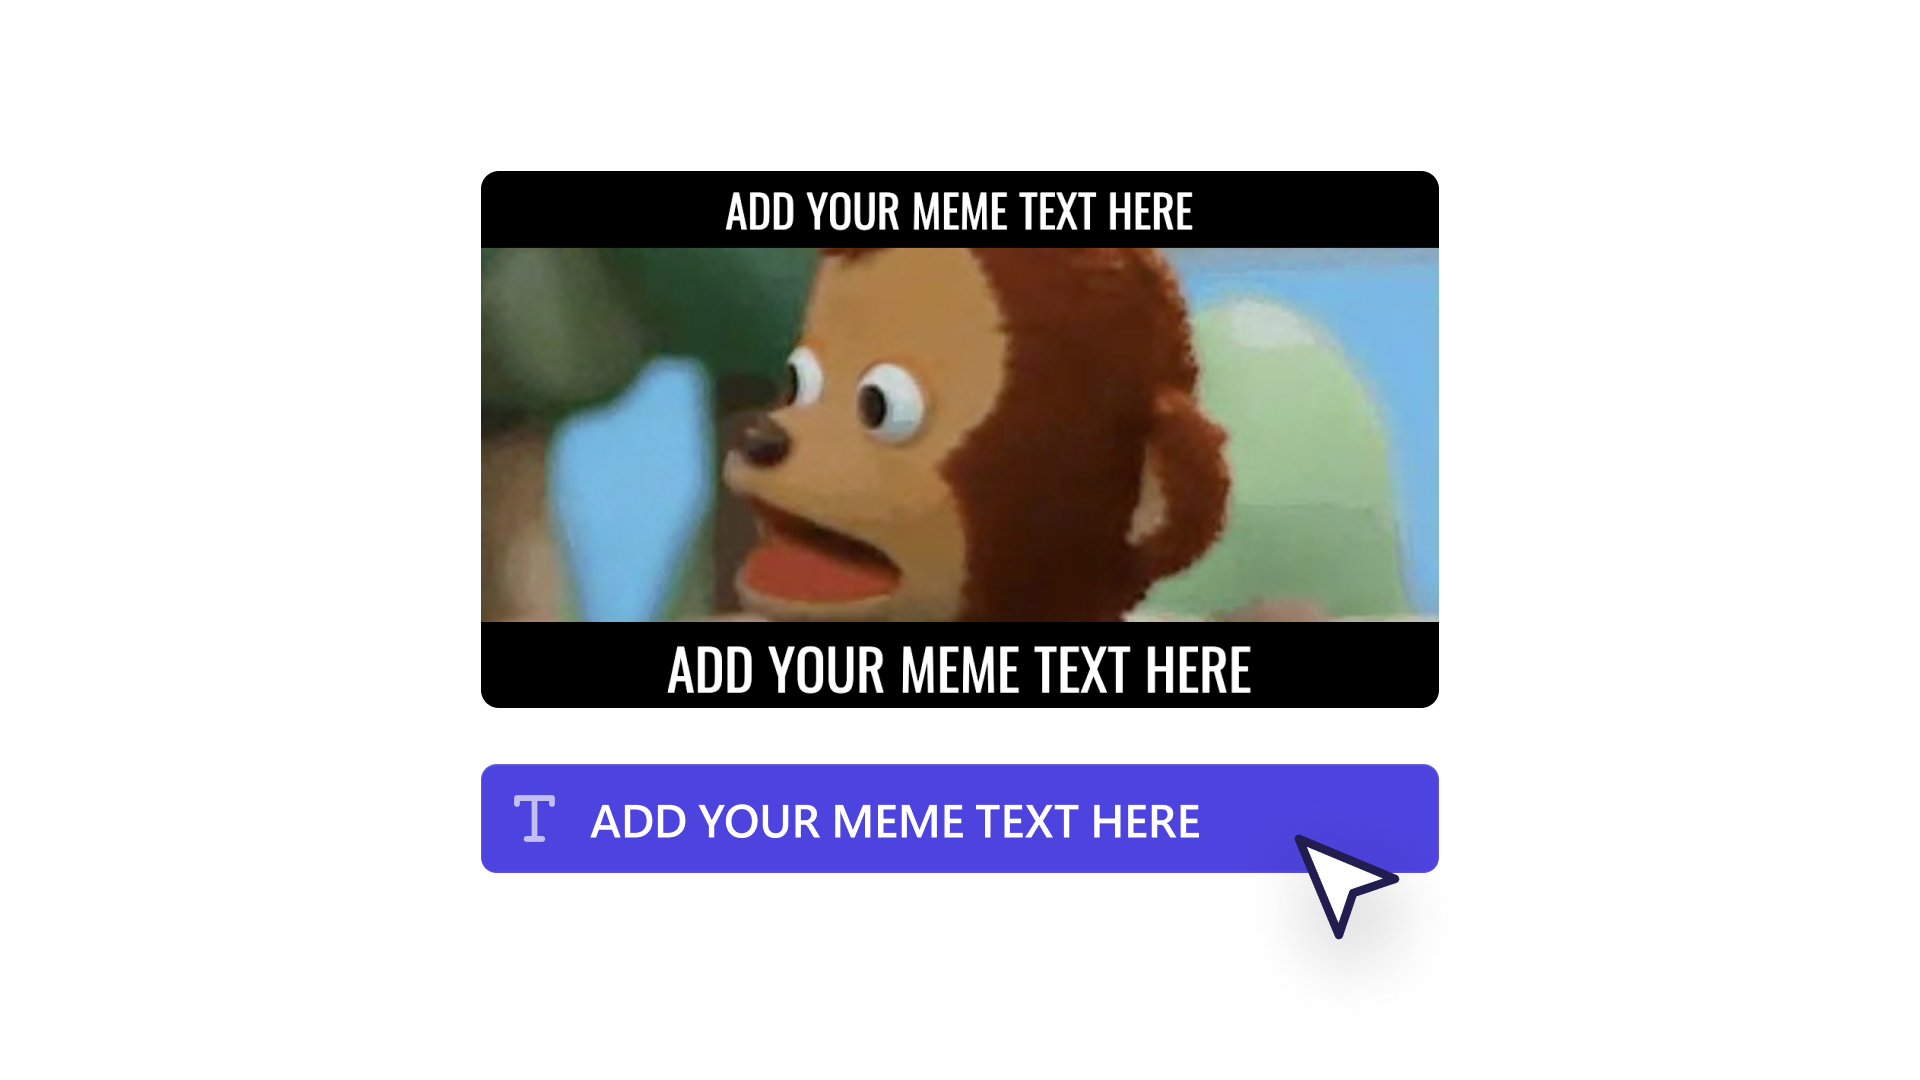 Change meme text in template in Clipchamp